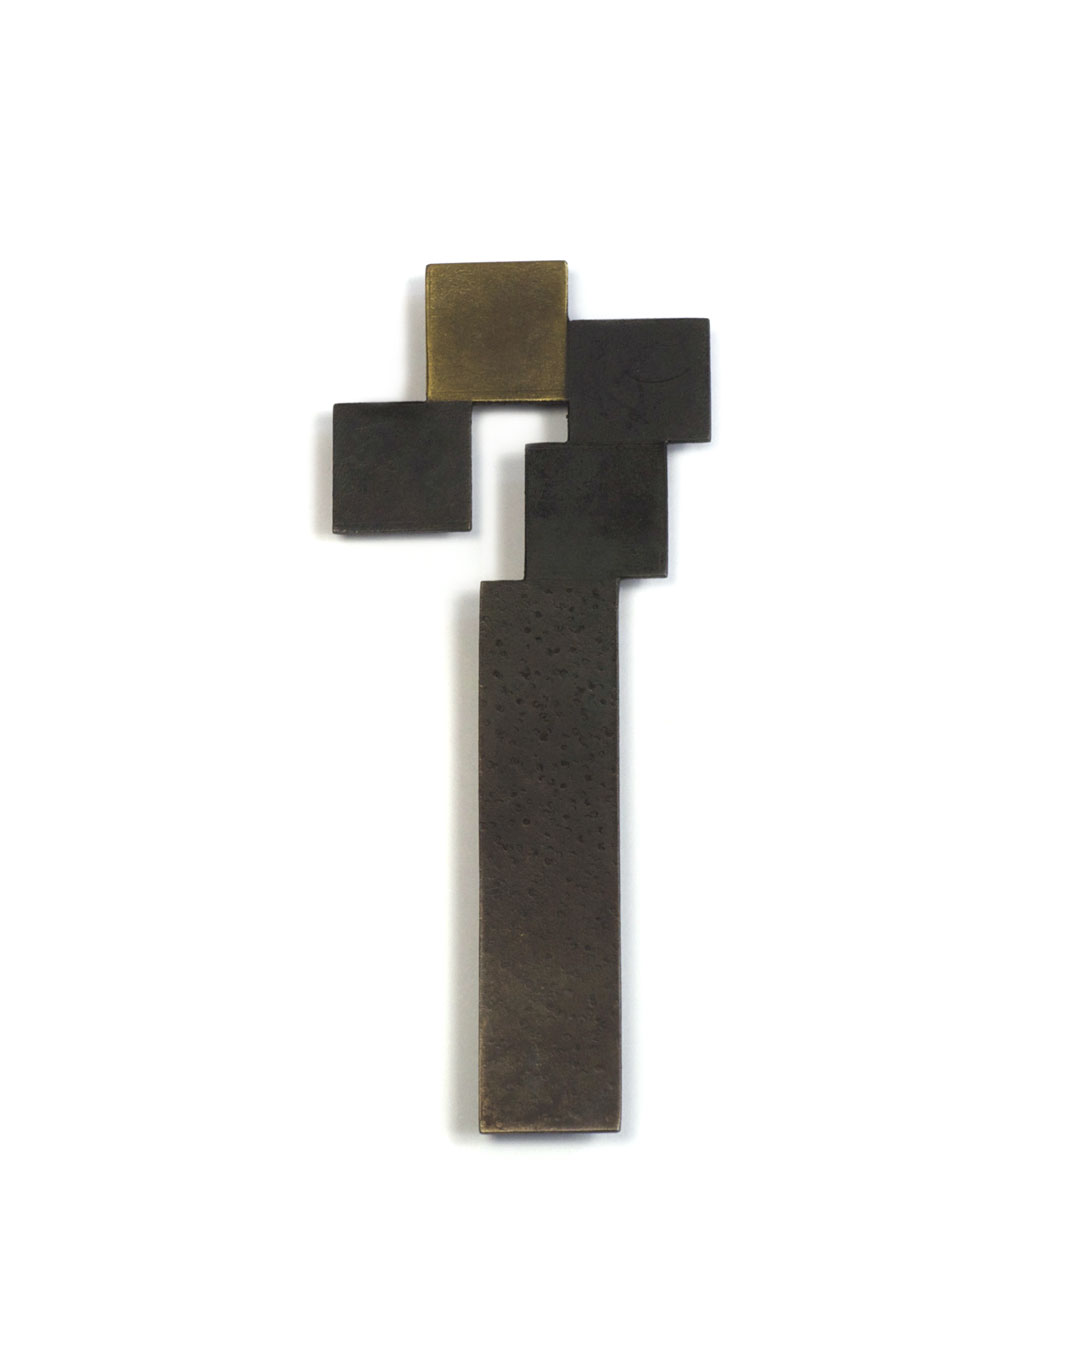 Tore Svensson, 18 Square Centimetres, 2006, brooch; steel, partly gilt, partly silver-plated, 85 x 55 x 1.5 mm, €315